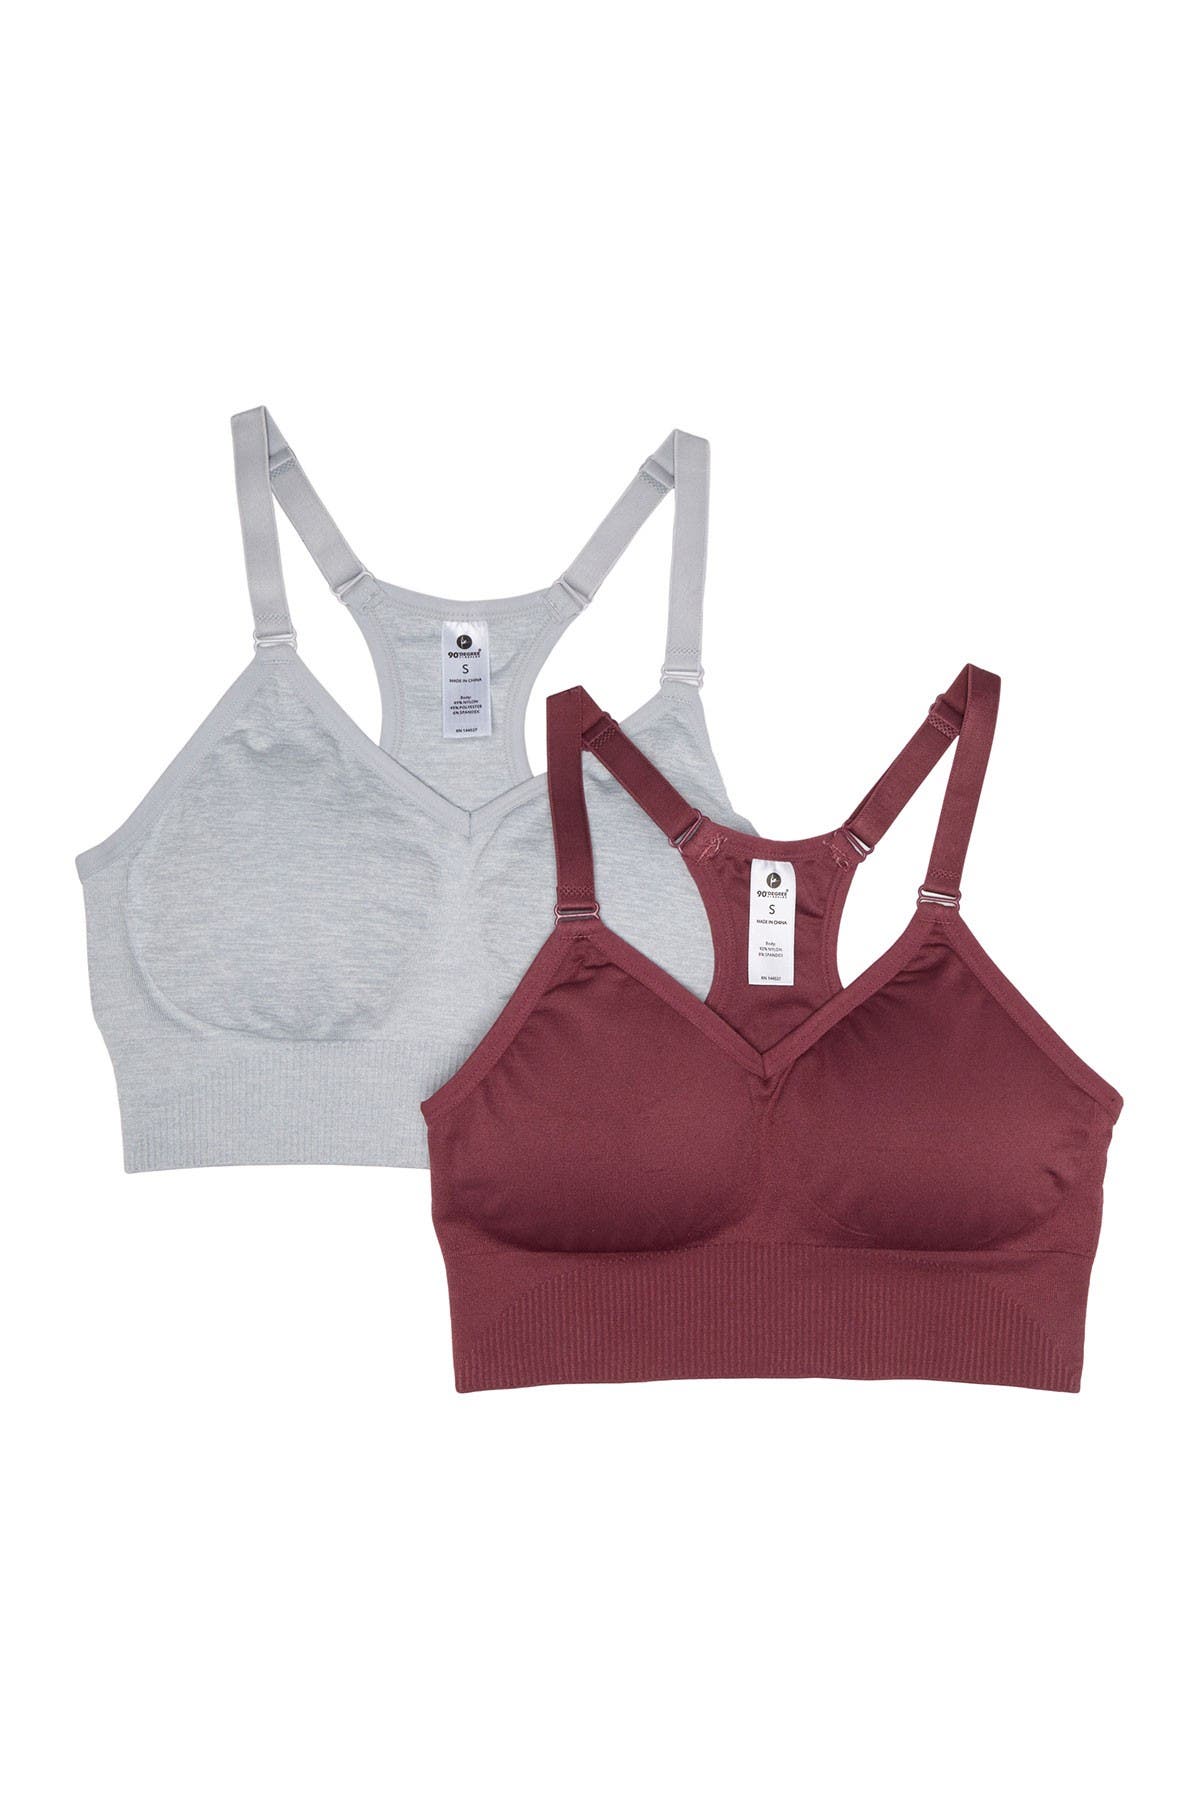 90 Degree By Reflex | Seamless Bra Tops With Adjustable Straps - Pack ...